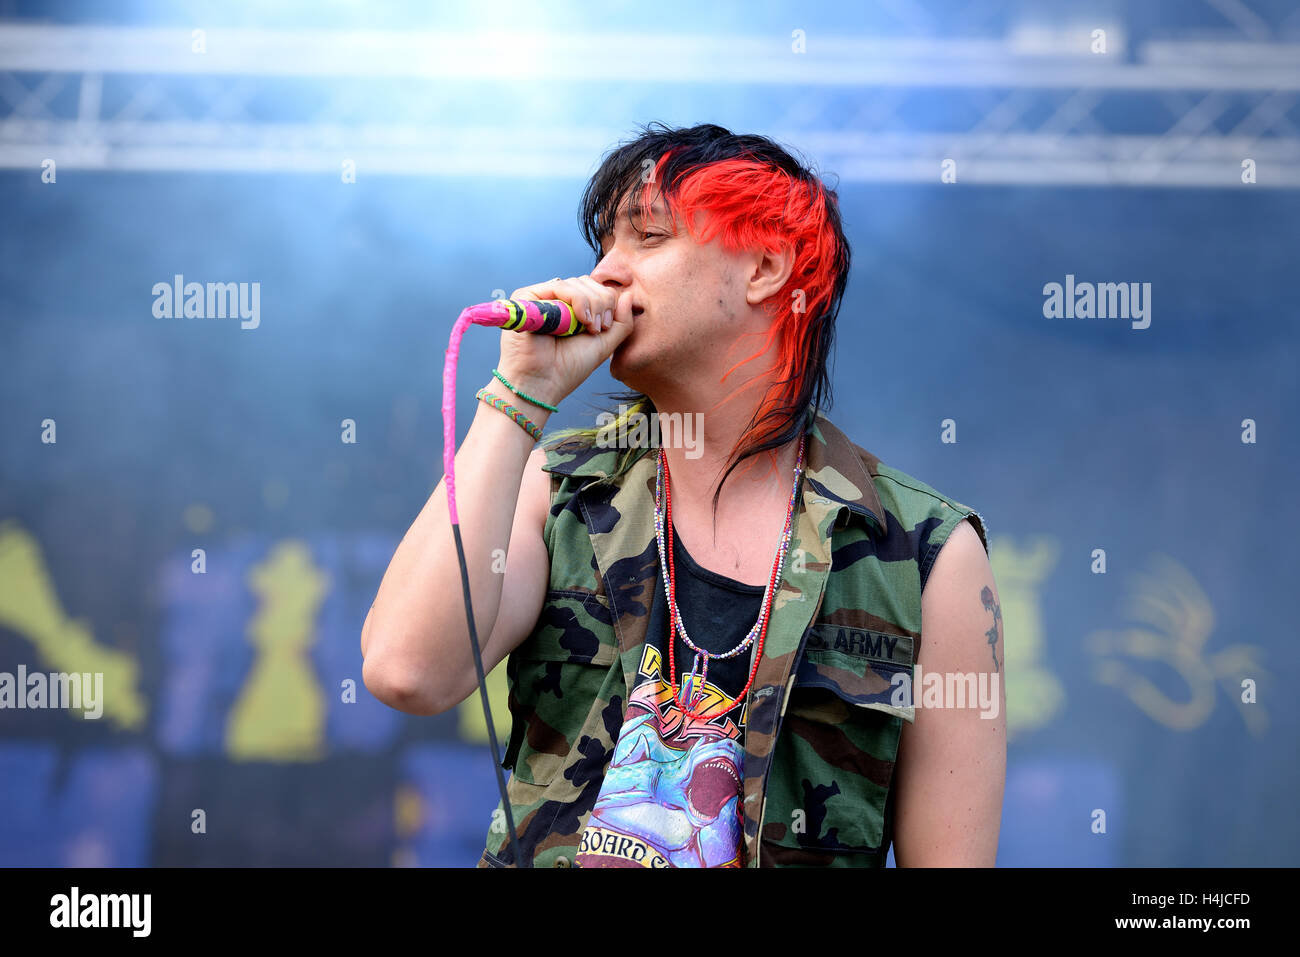 BARCELONA - MAY 29: Julian Casablancas and The Voidz (band) performs at Primavera Sound 2015 Festival on May 29, 2015 in Barcelo Stock Photo